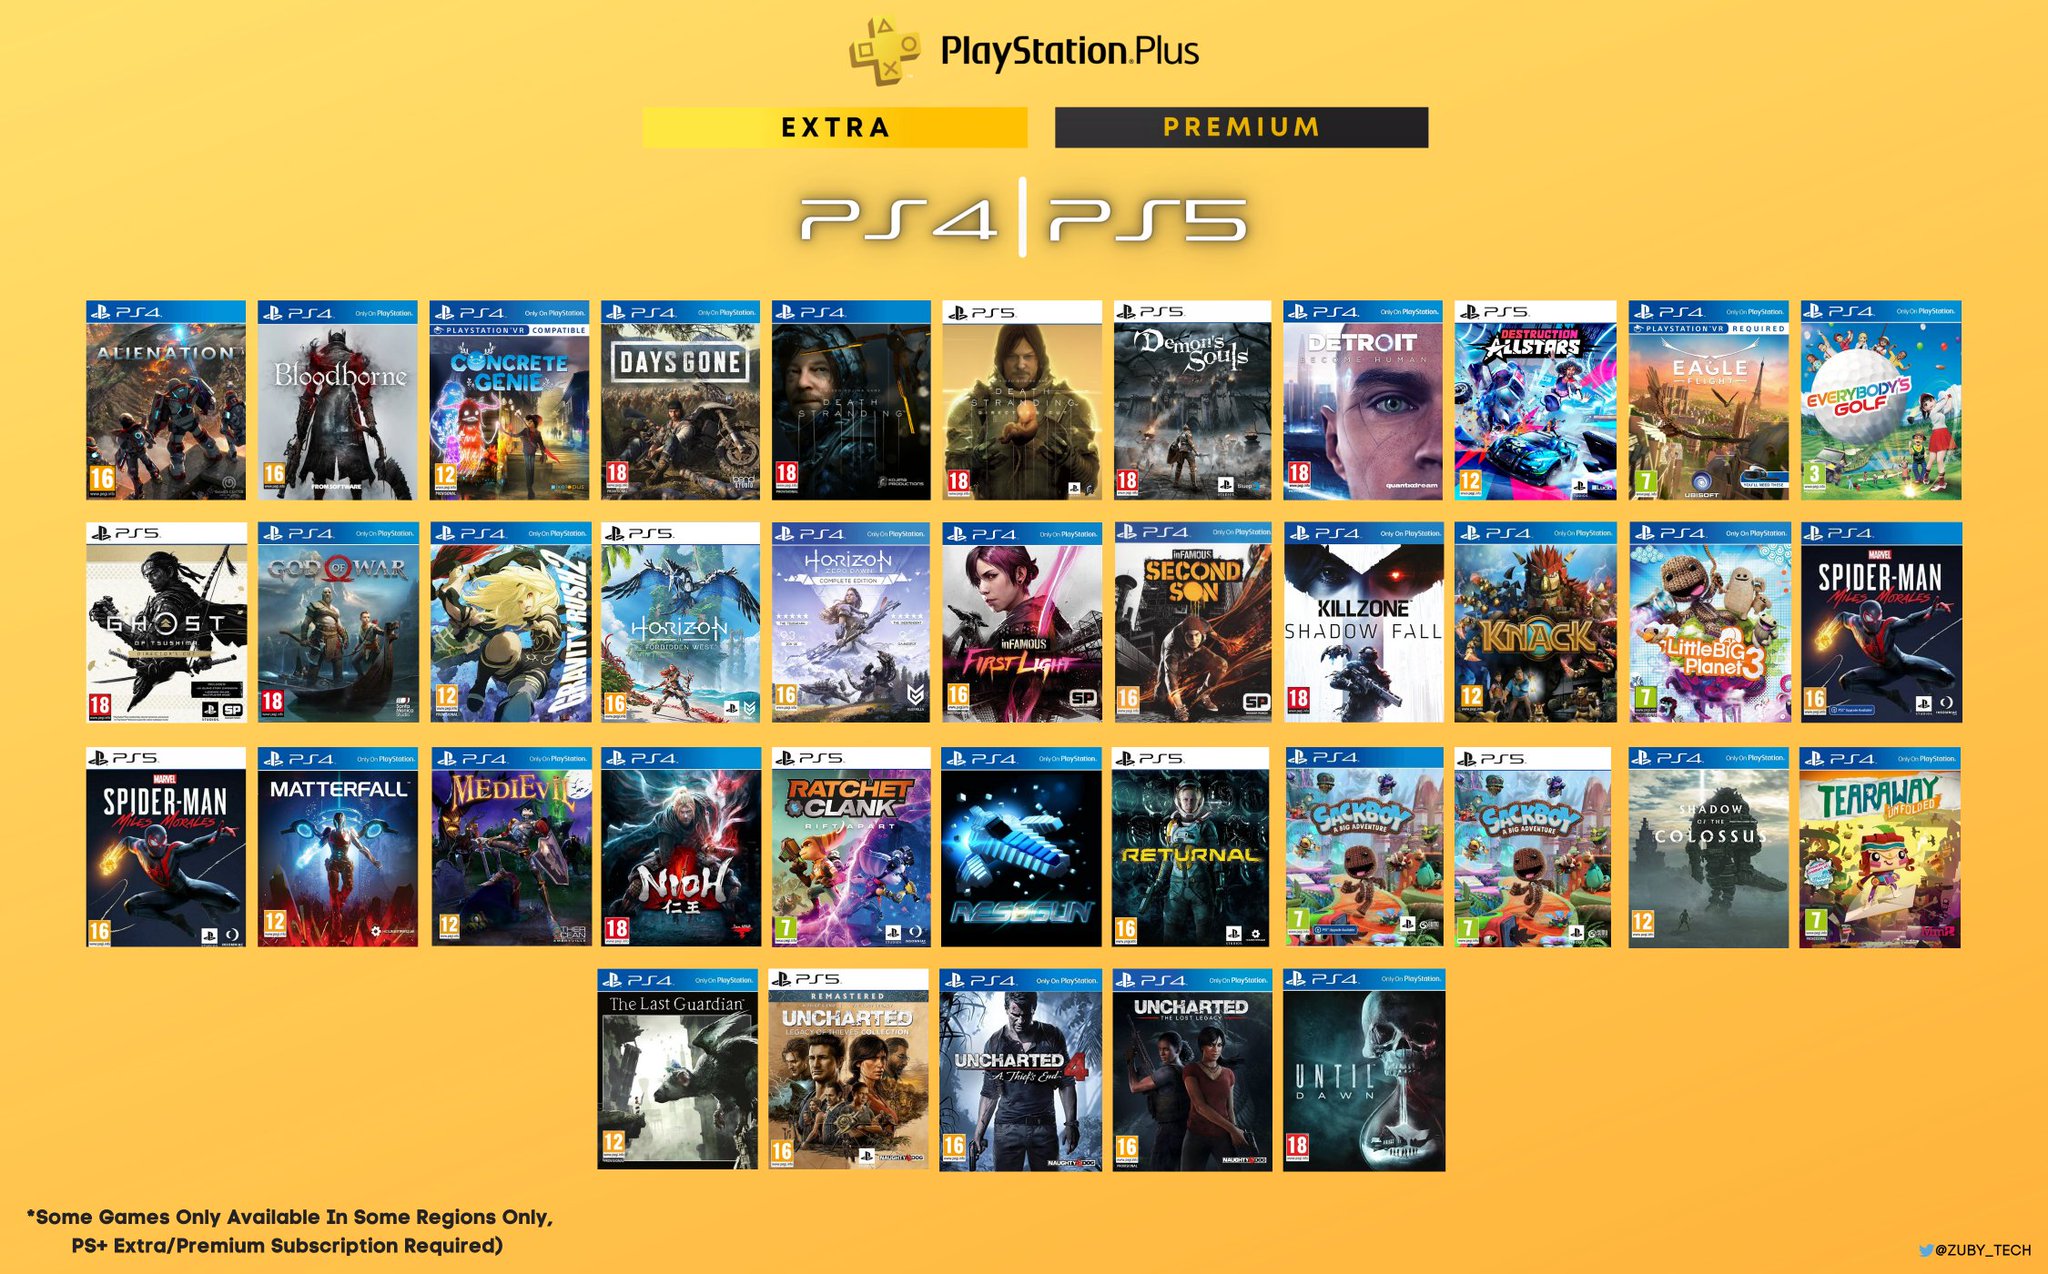 Zuby_Tech on X: PlayStation Plus Game Catalog Extra & Premium